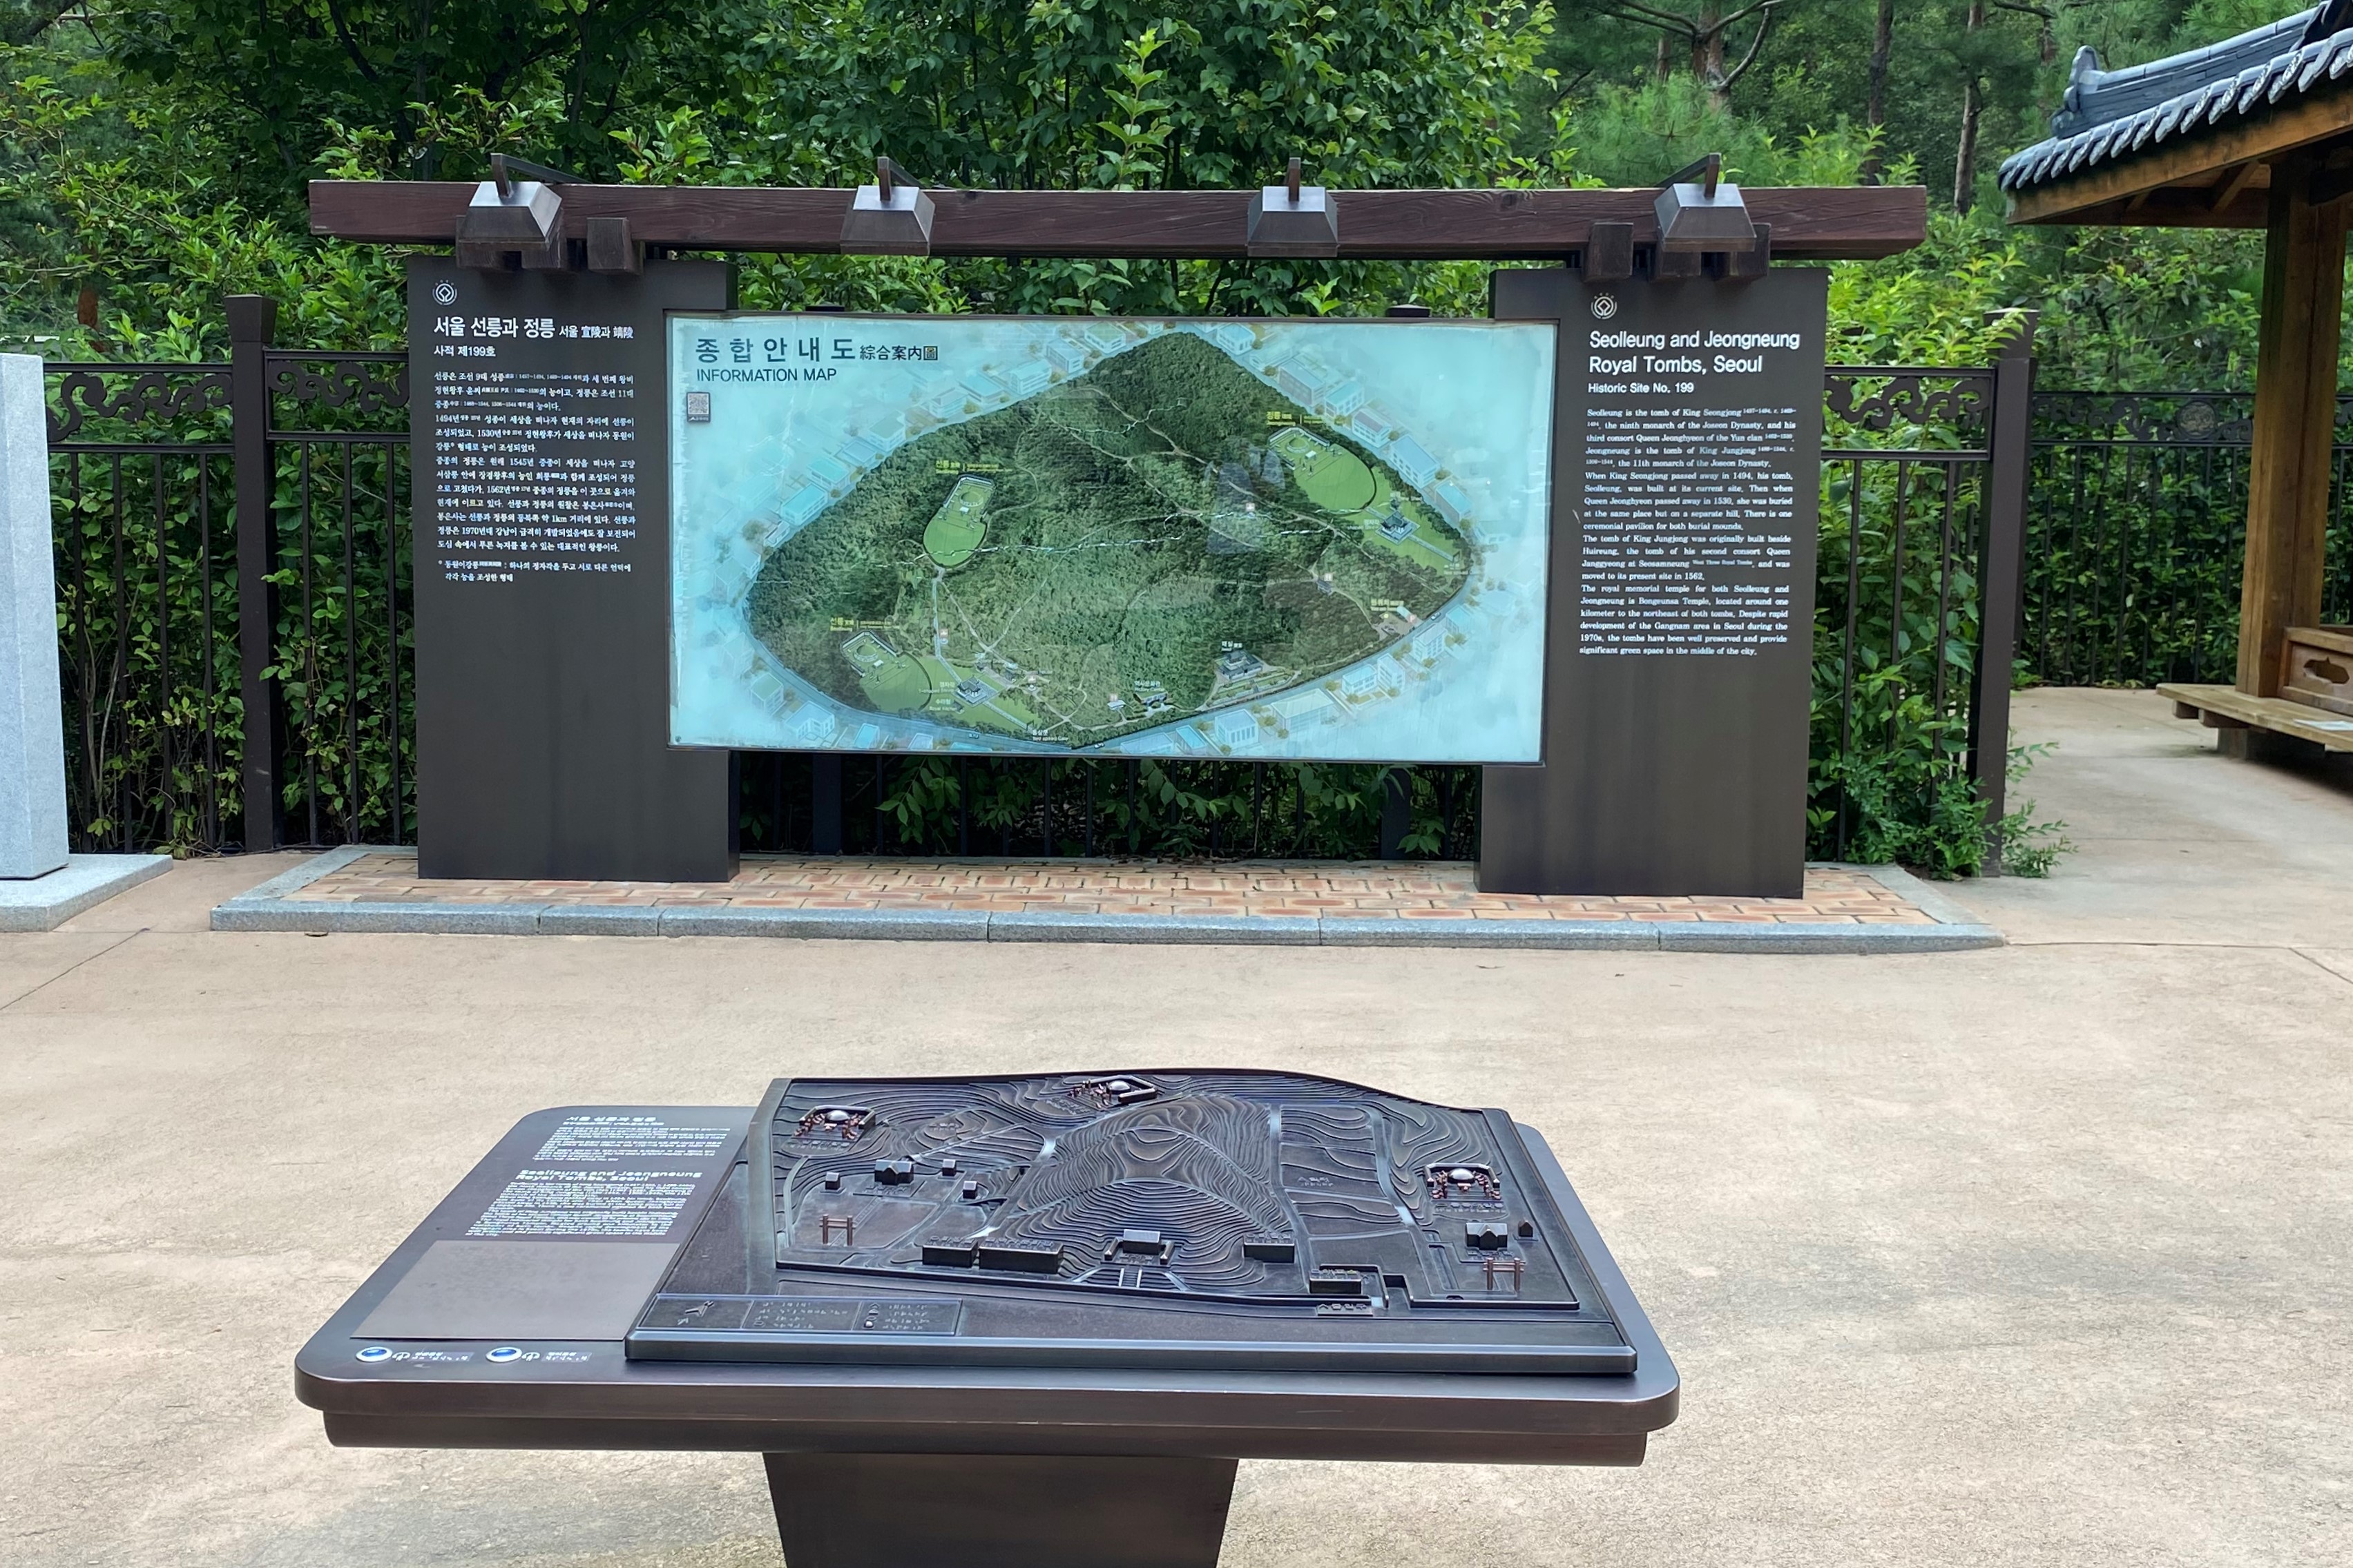 Guide map and information desk0 : Tactual map in Seolleung and Jeongneung Royal Tombs 
